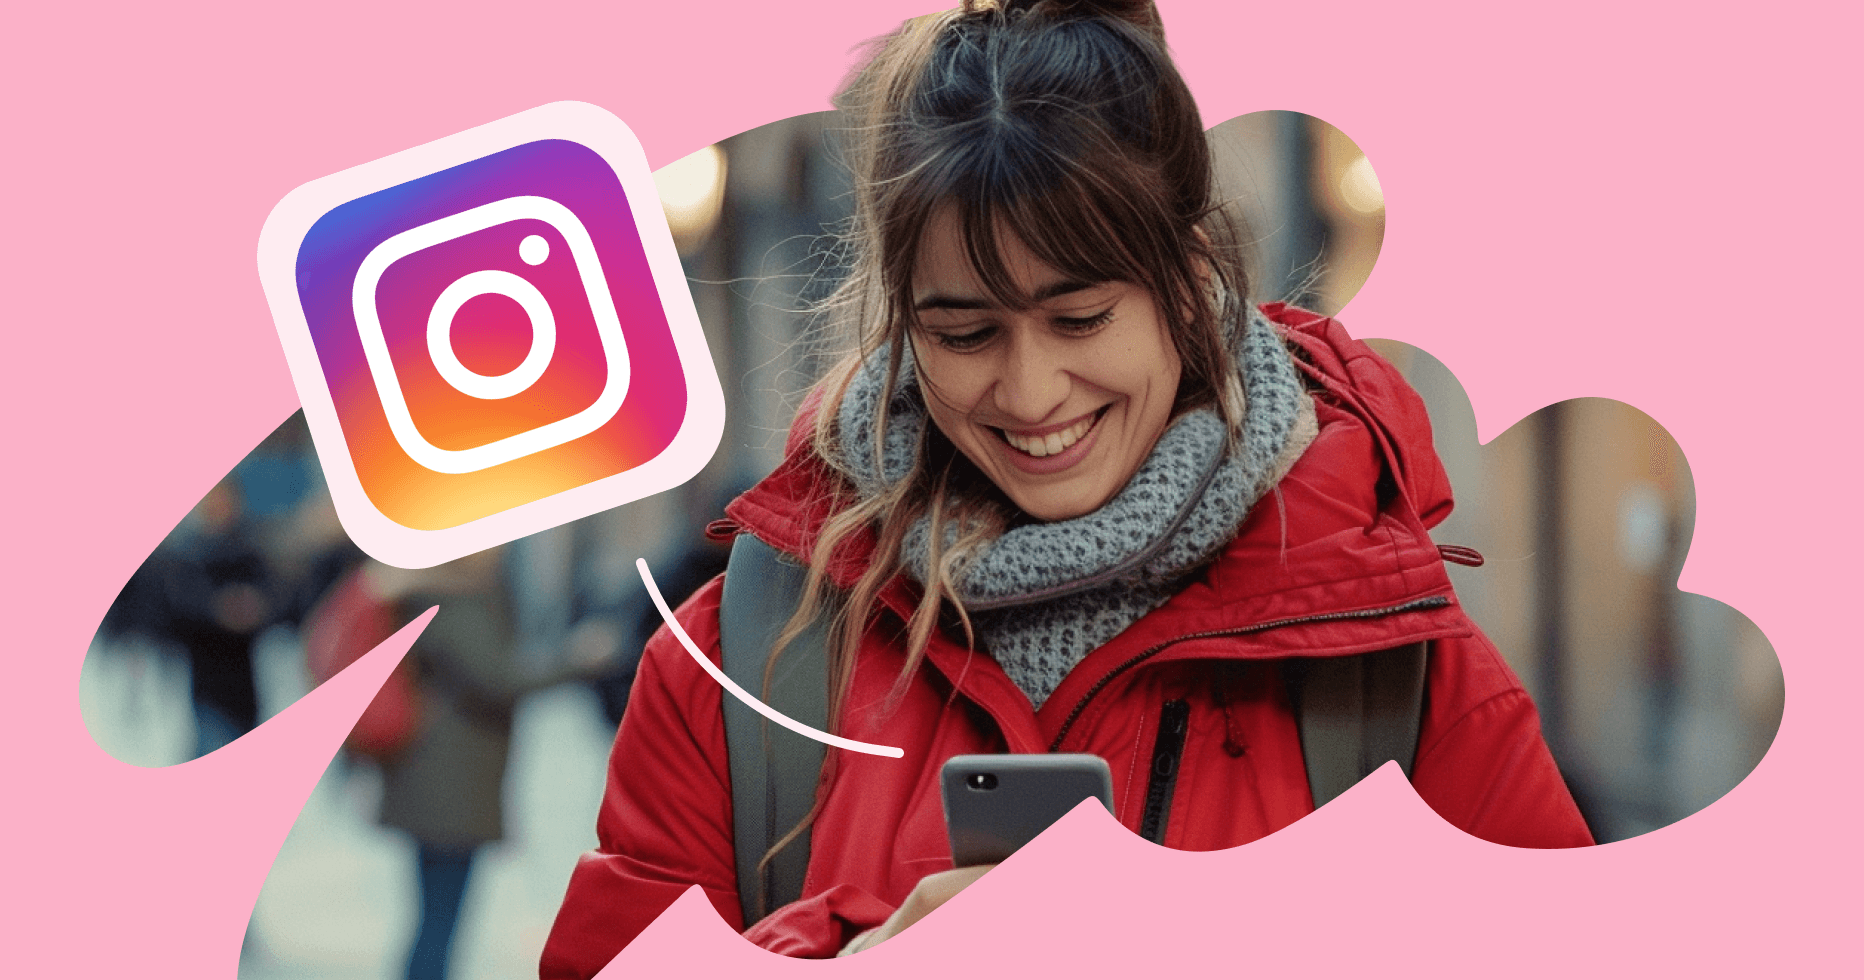 How to Use Instagram for Affiliate Marketing? (Step-By-Step)